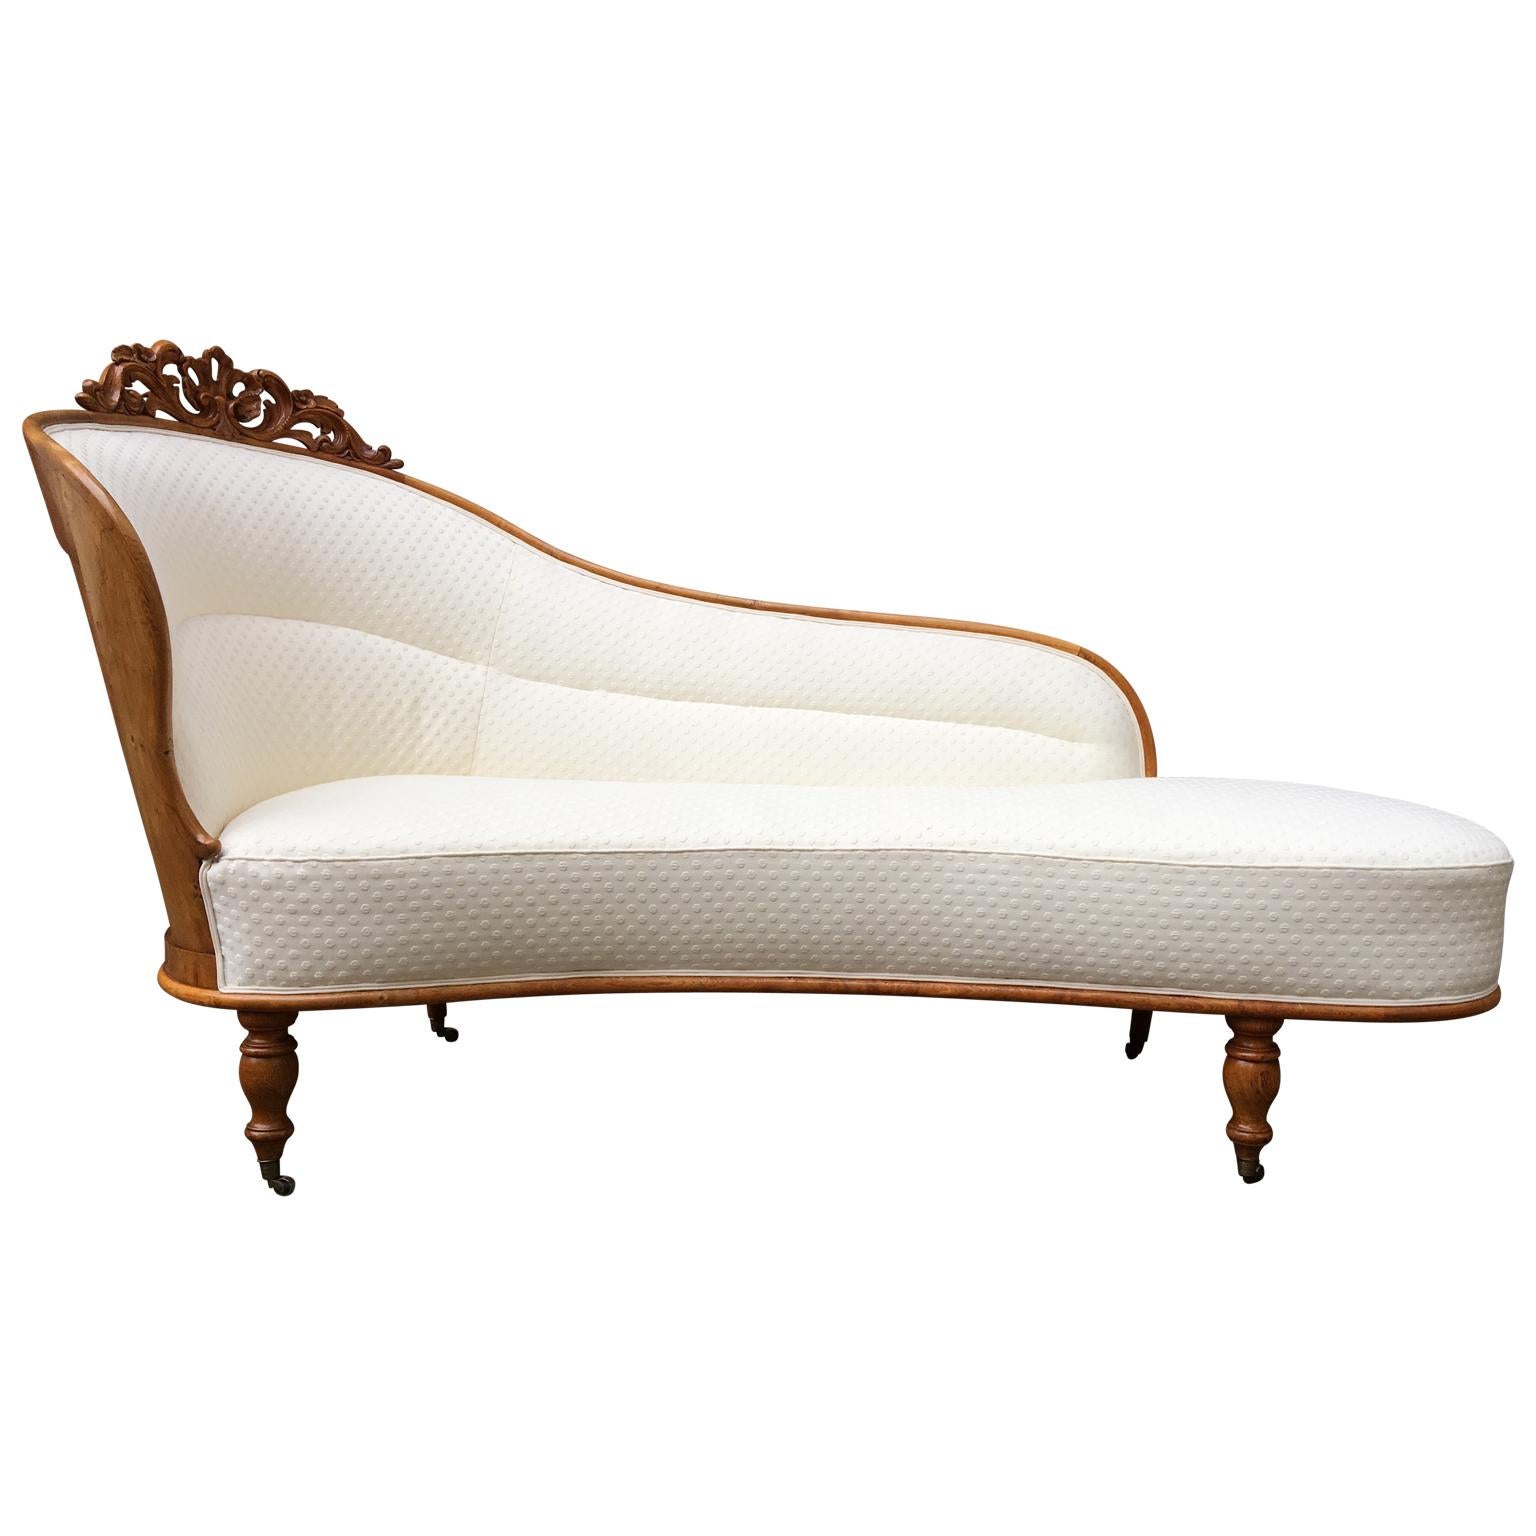 Swedish 19th Century Rococo Chaise Lounge Chair Daybed 3